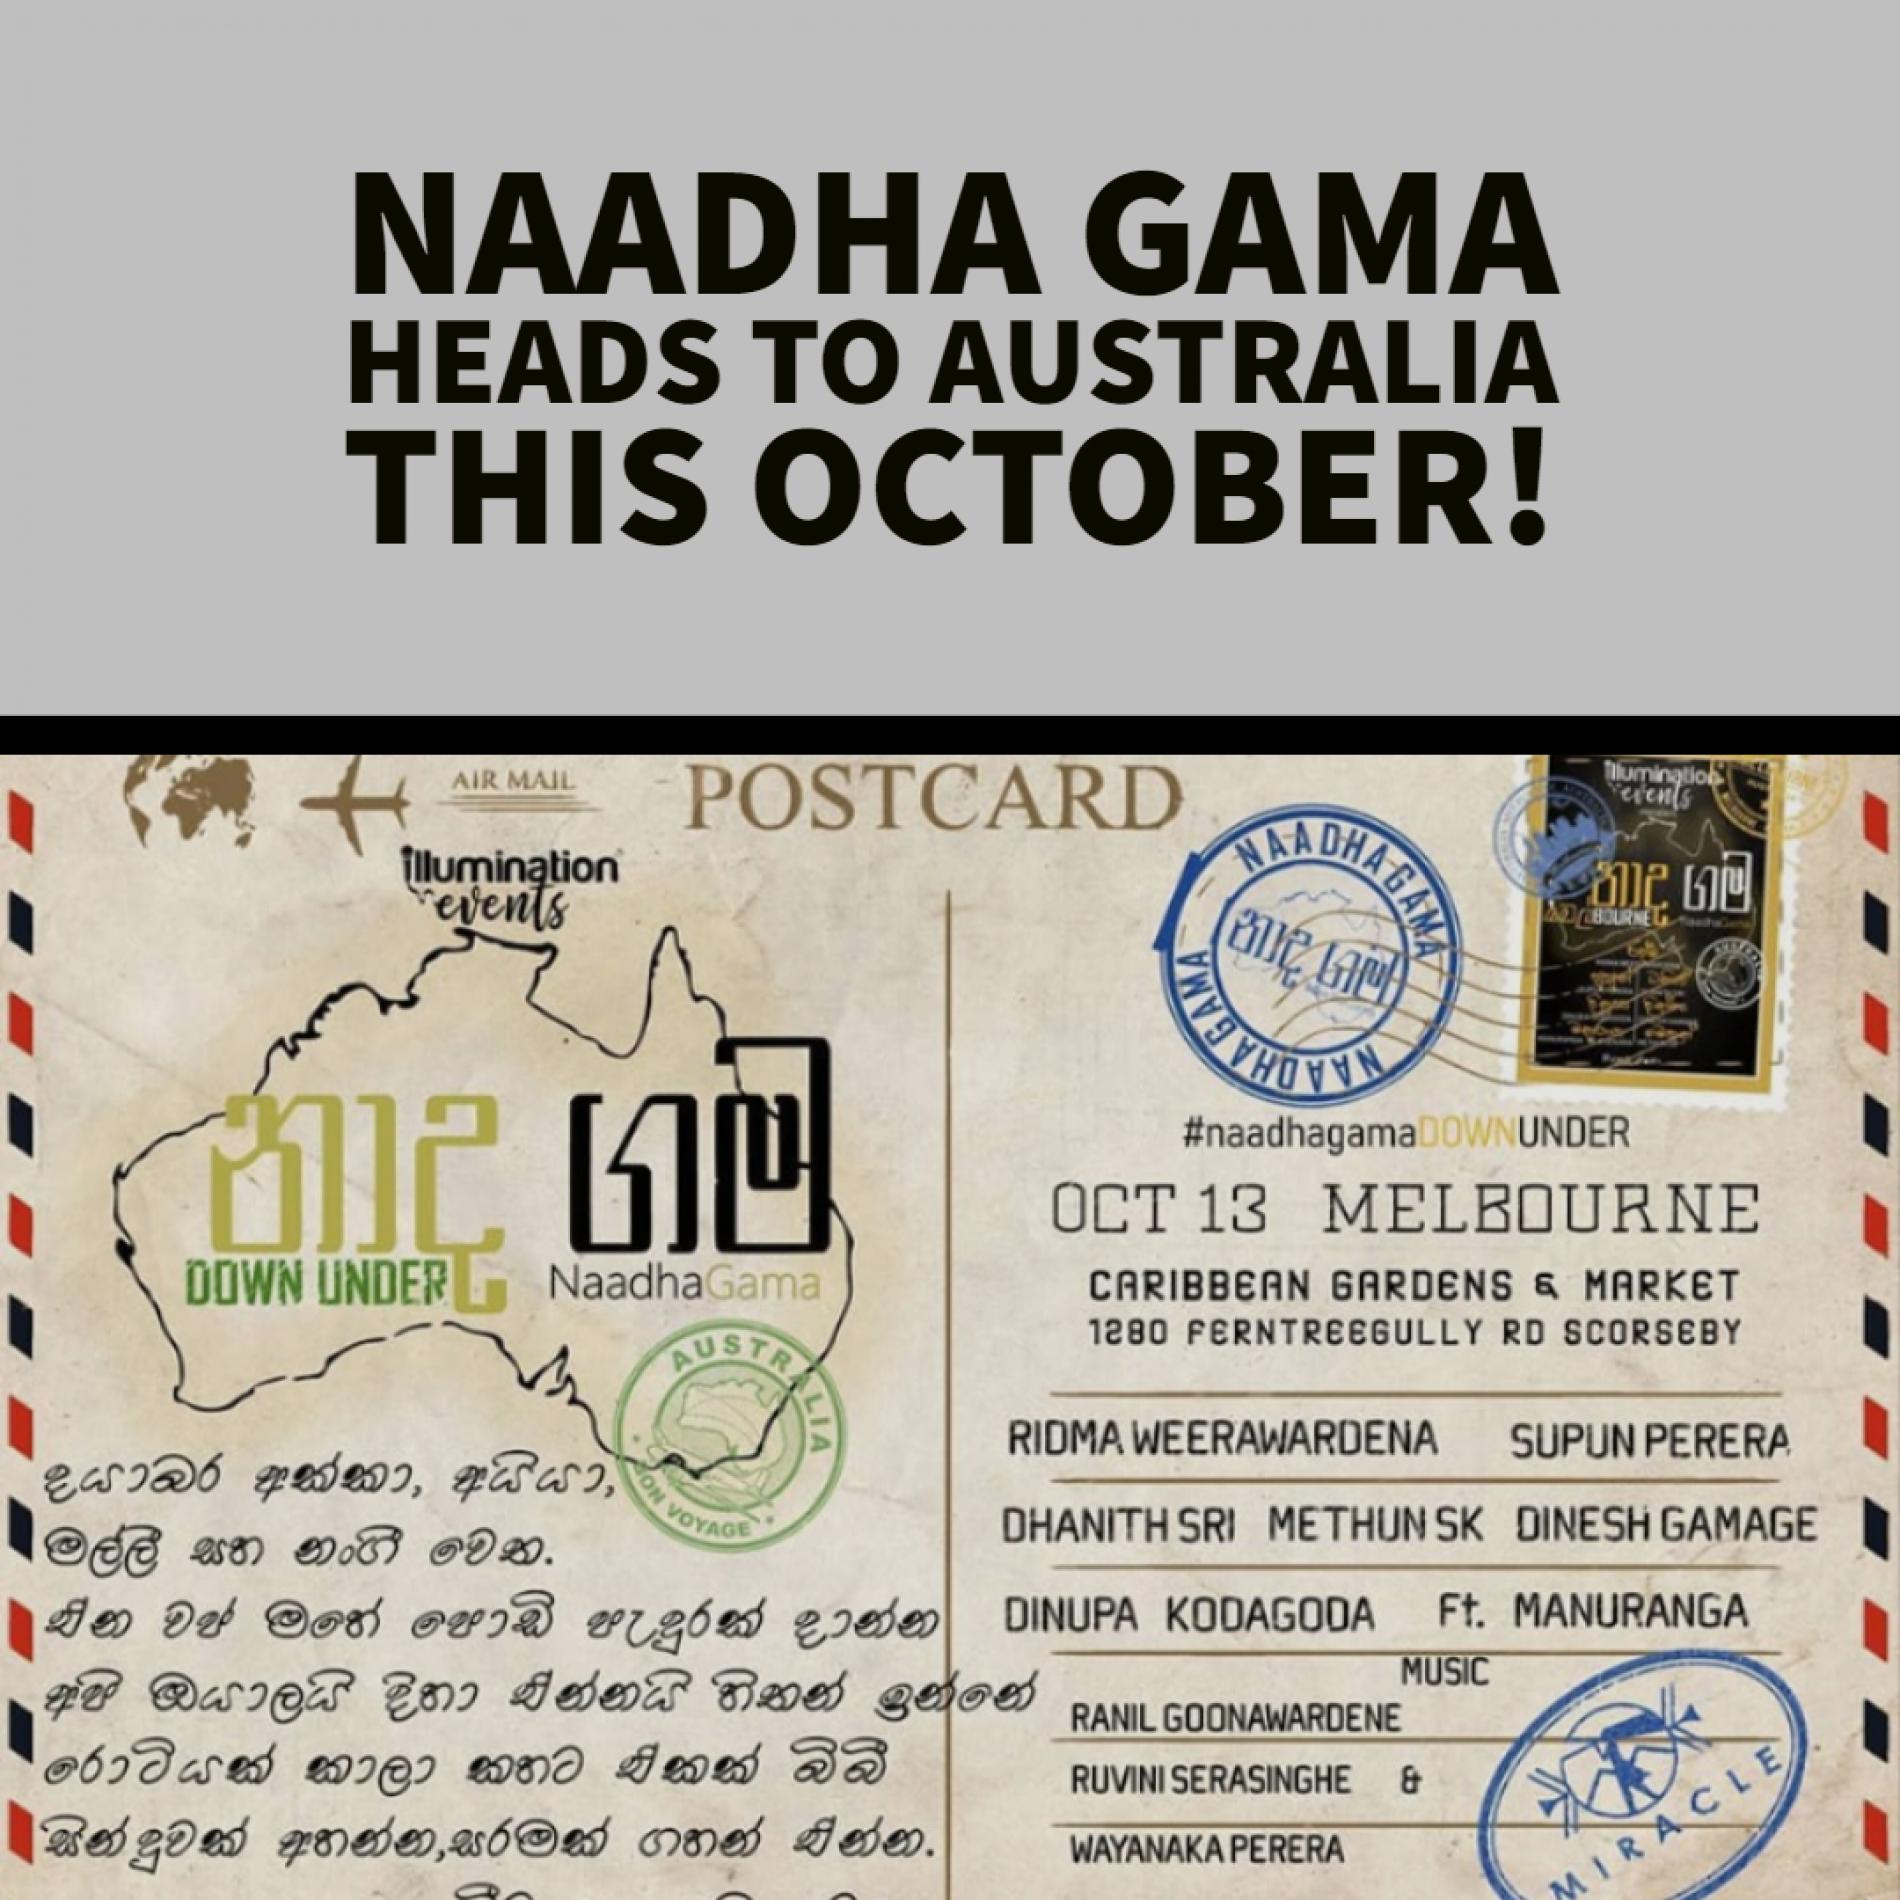 Naadha Gama Will Be On In Melbourne This October!